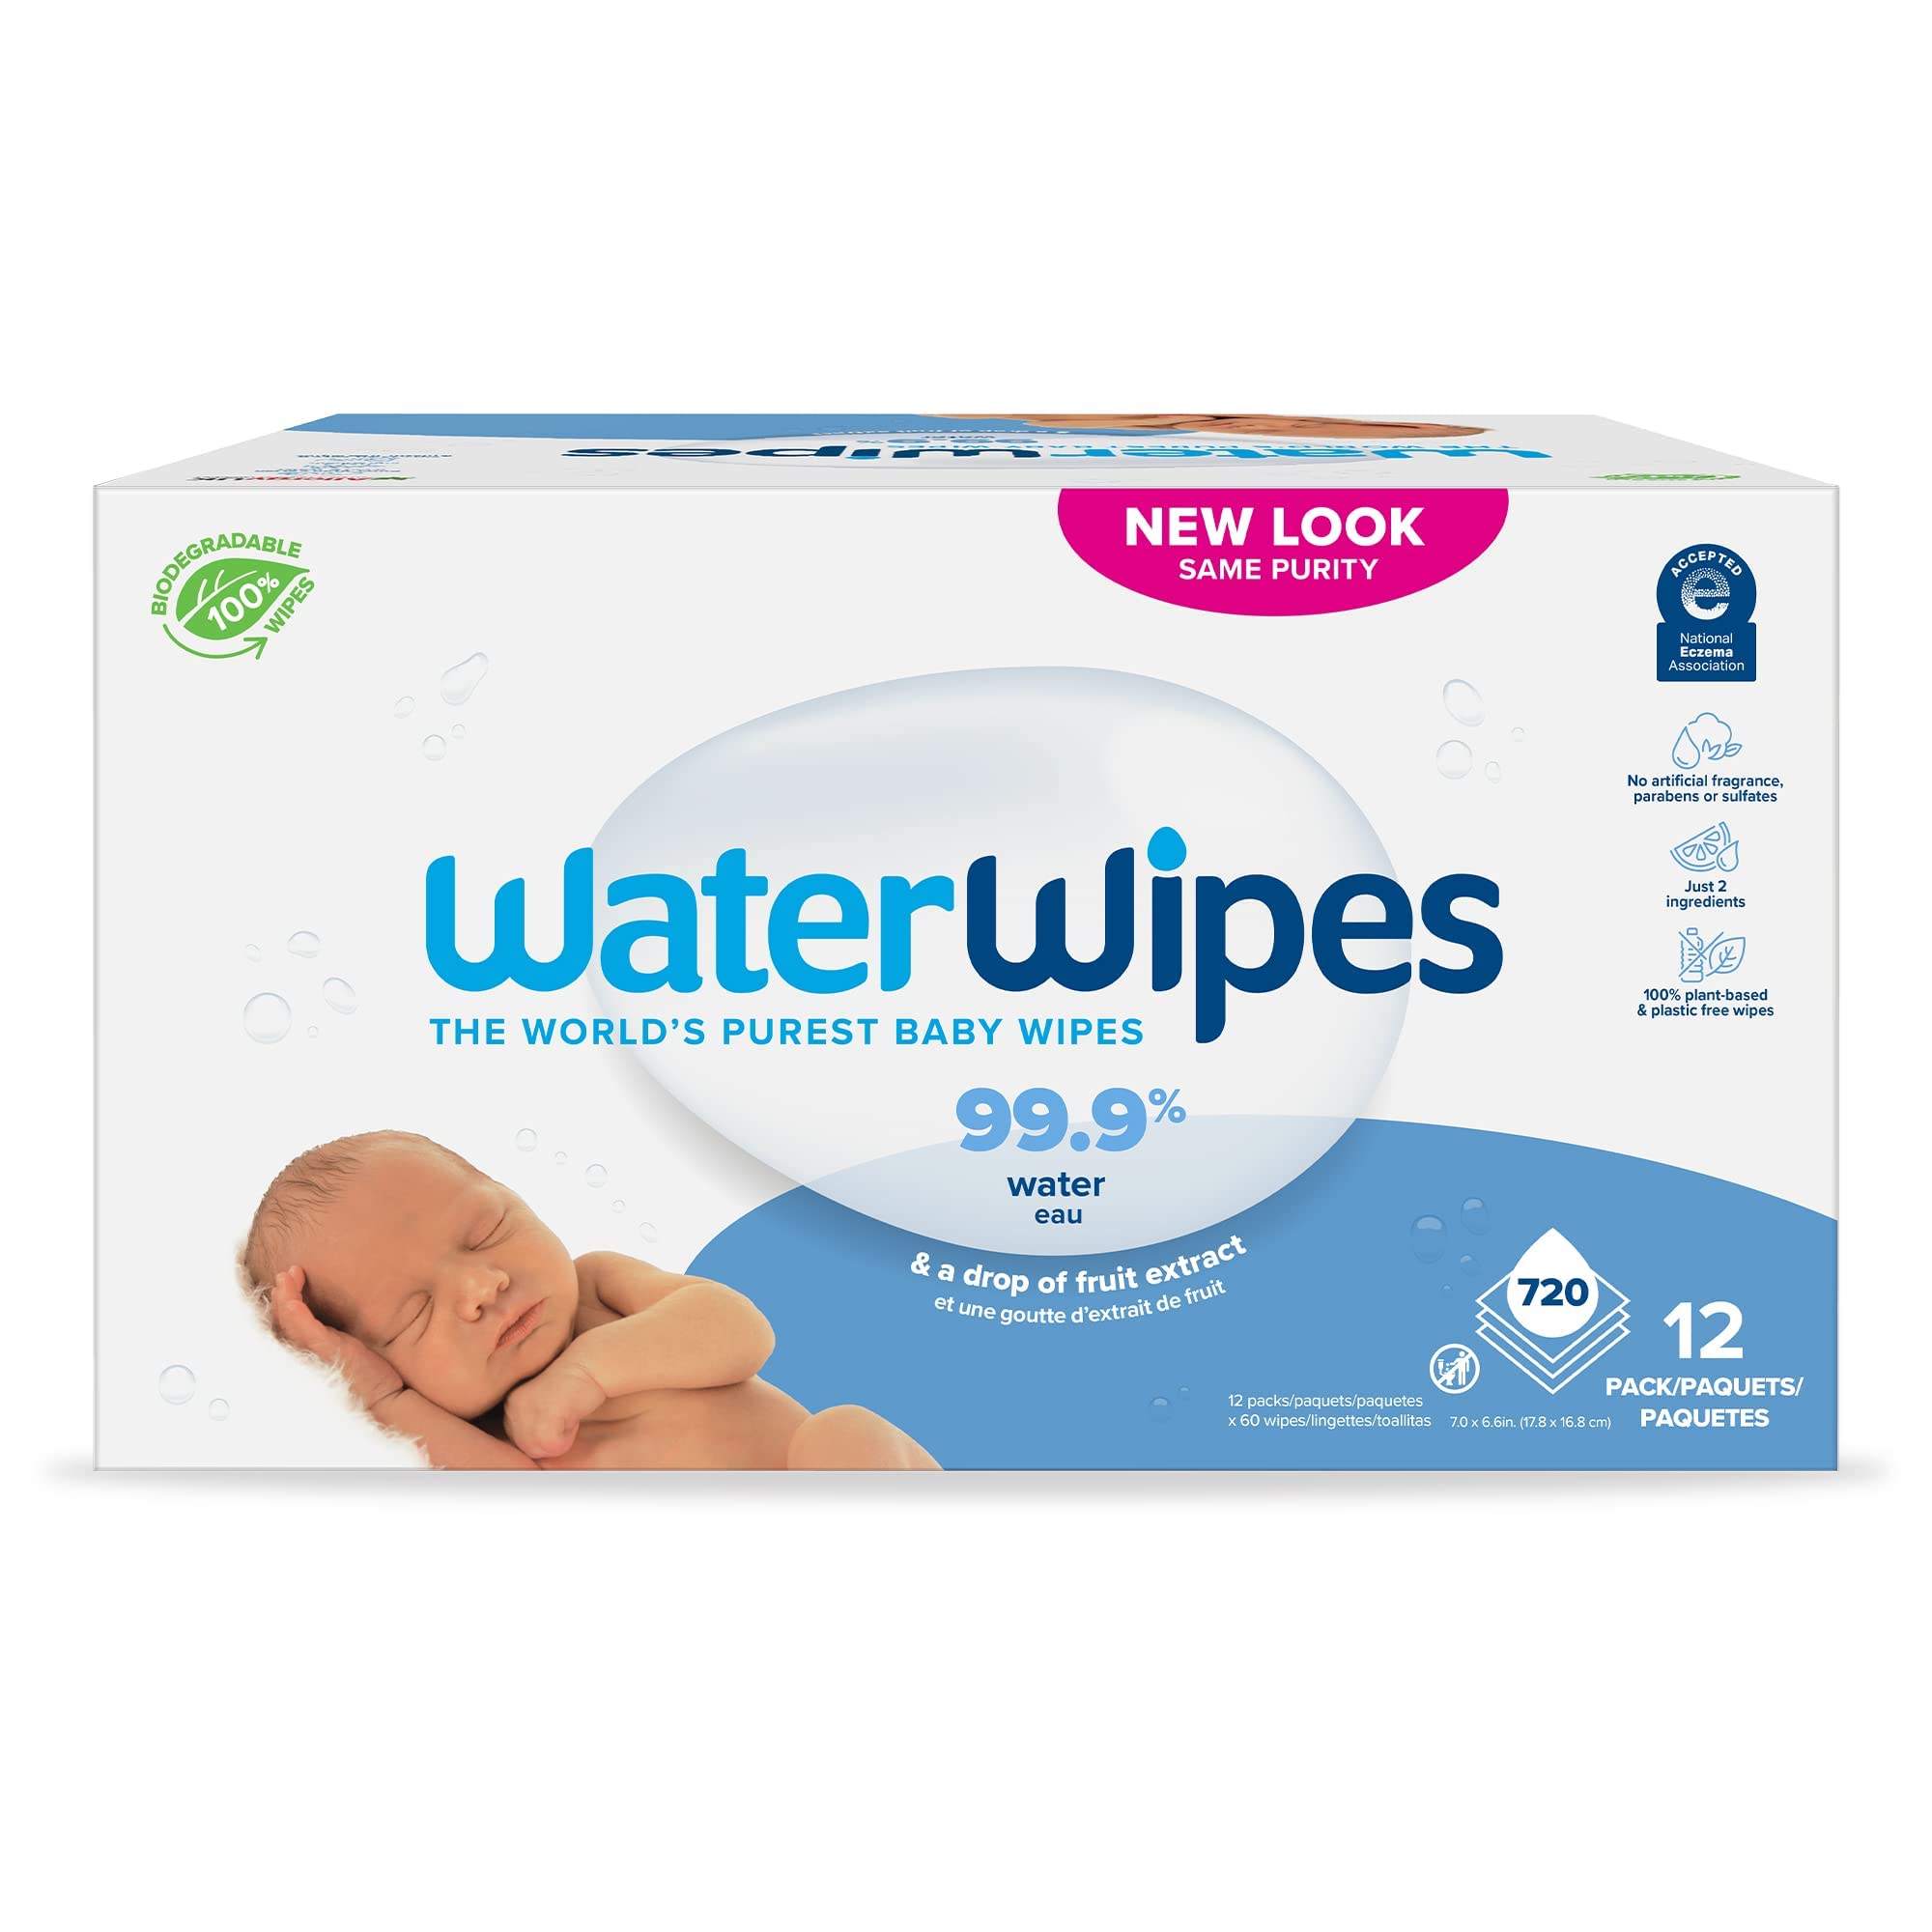 WaterWipes Plastic-Free Original Baby Wipes, 99.9% Water Based Wipes, Unscented & Hypoallergenic for Sensitive Skin, 60 Count (Pack of 12), Packaging May Vary $33.73